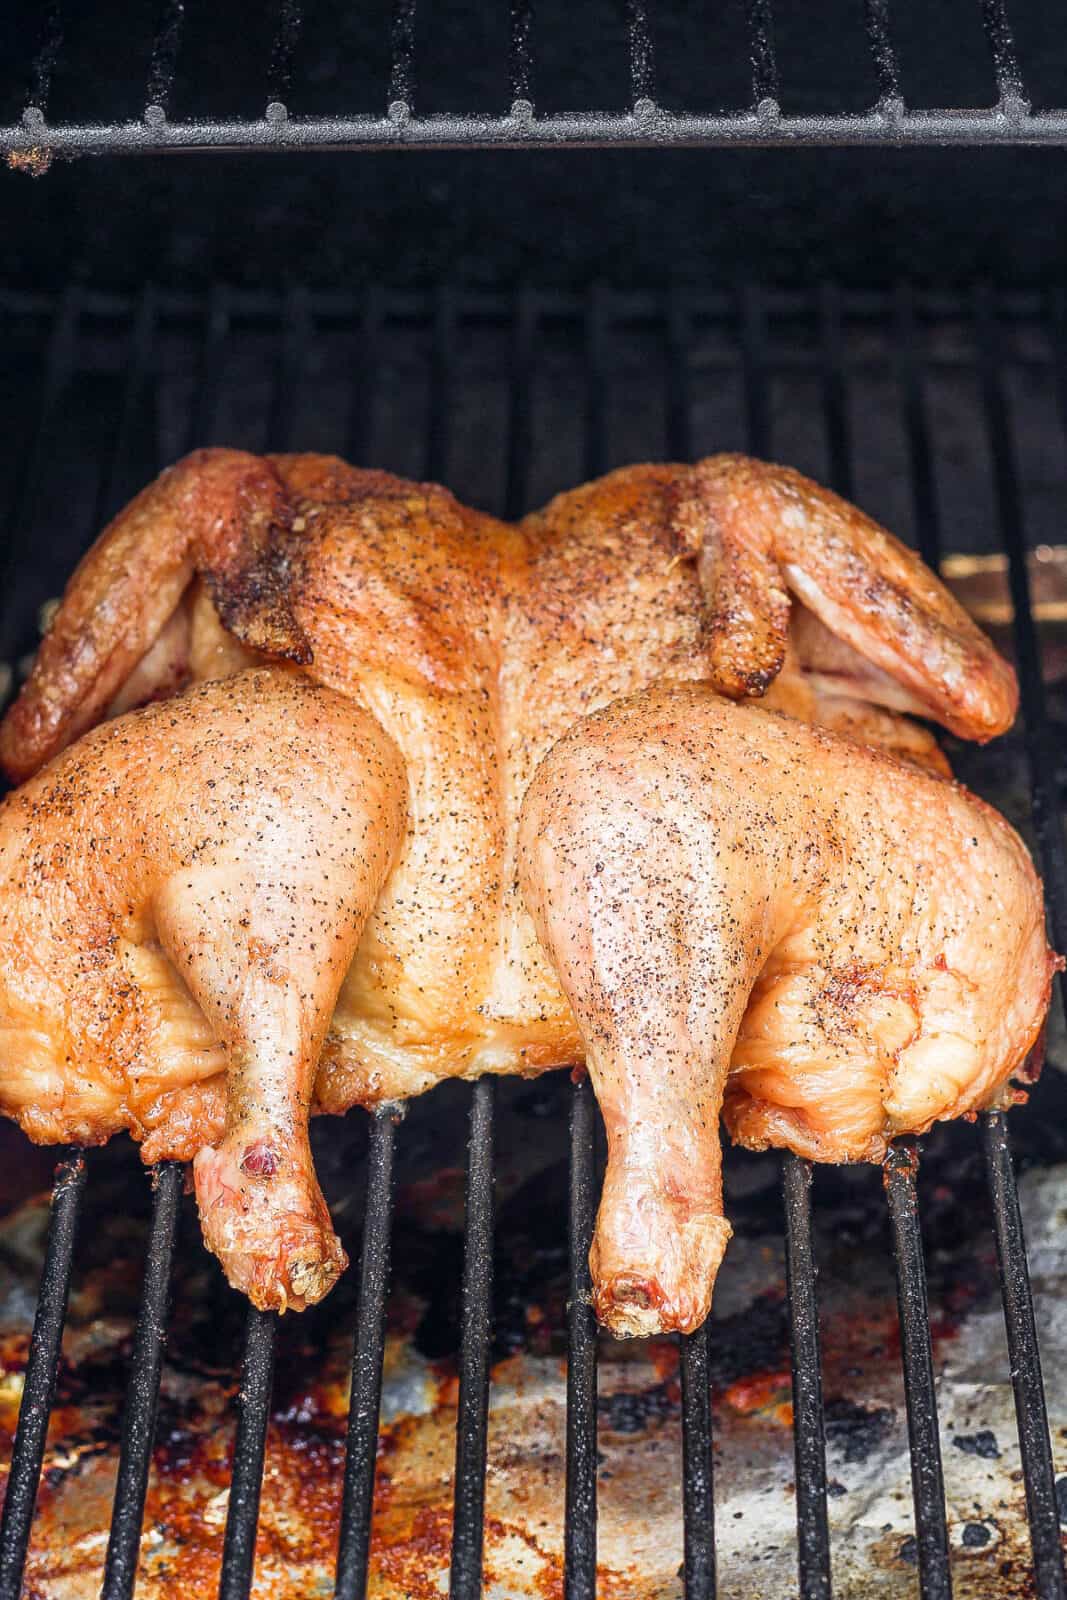 A spatchcocked chicken on the smoker, fully cooked.